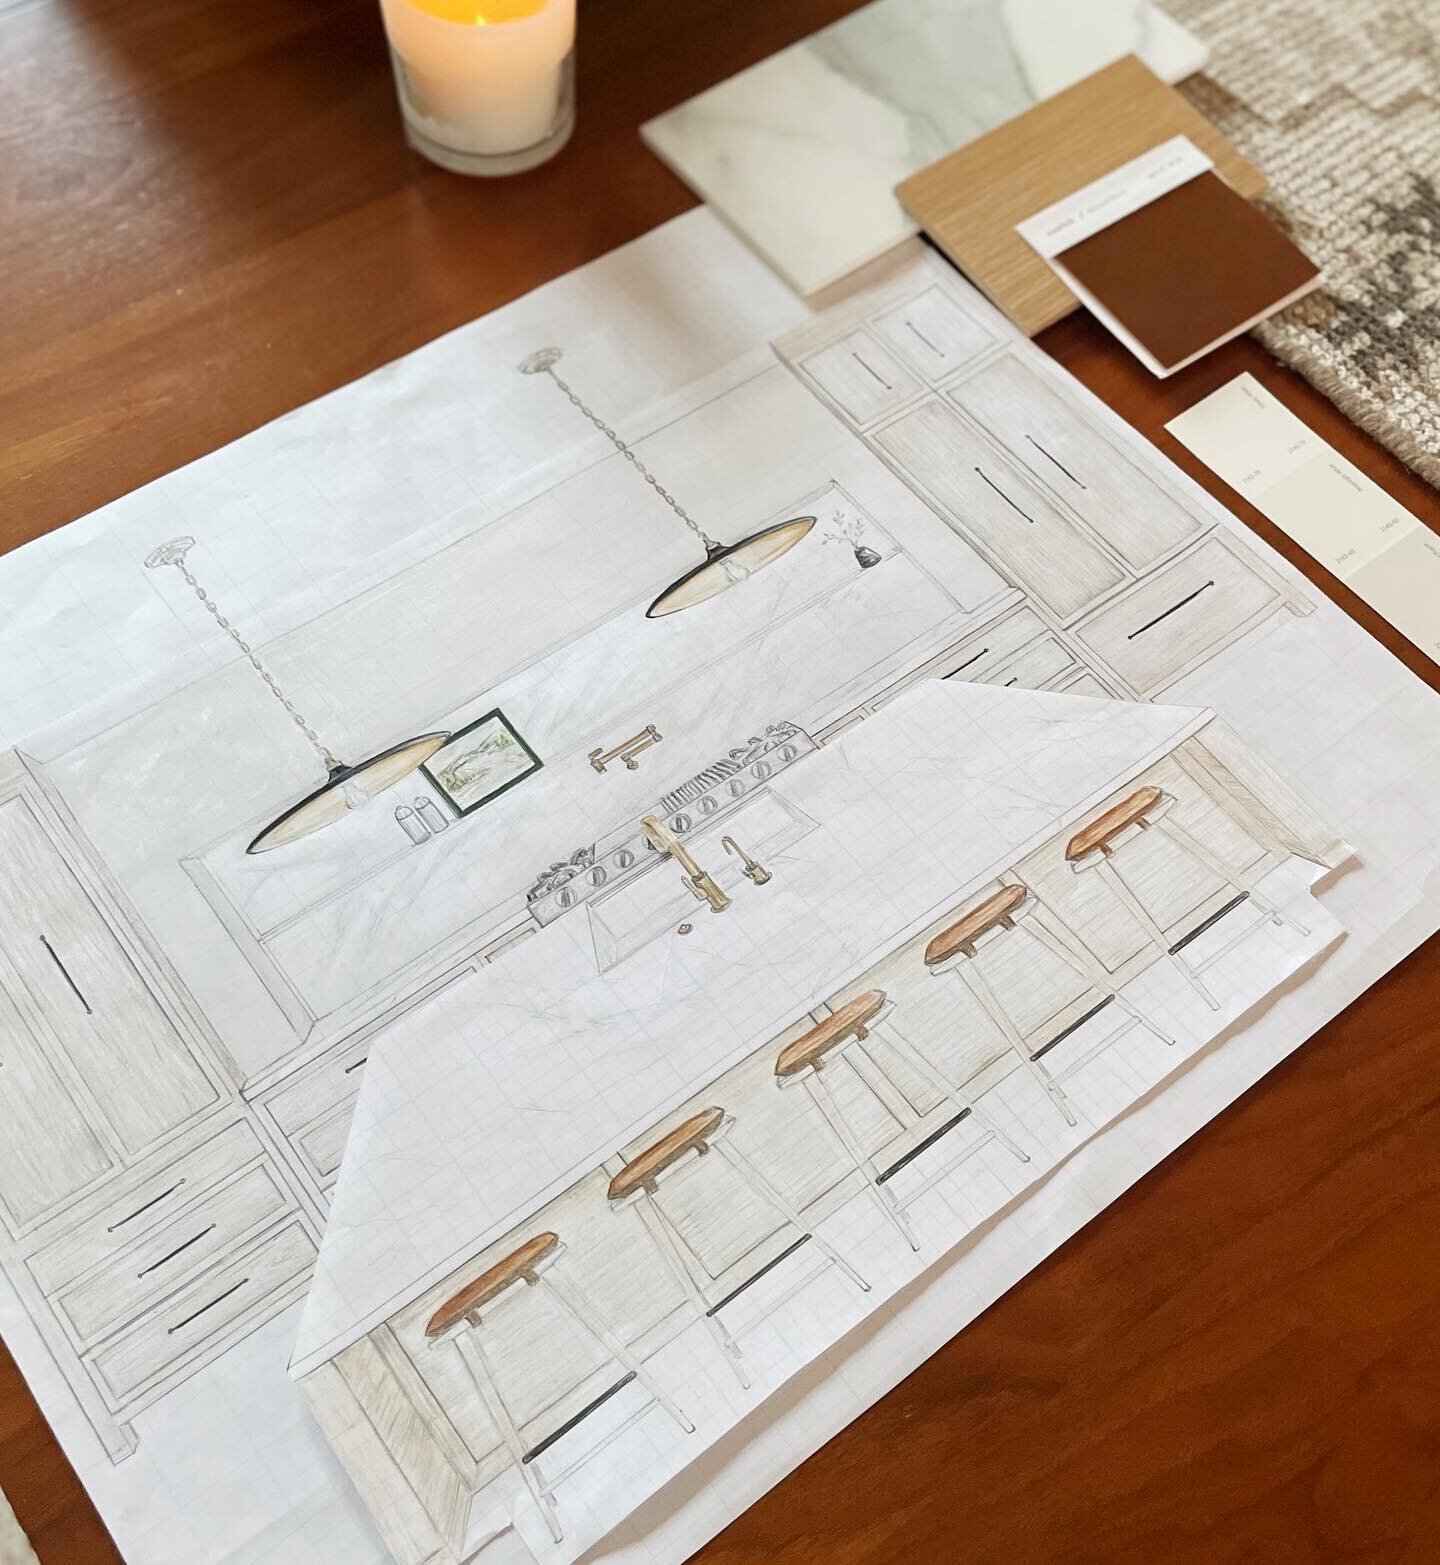 Can&rsquo;t wait to see these kitchen designs come to life! 🤩